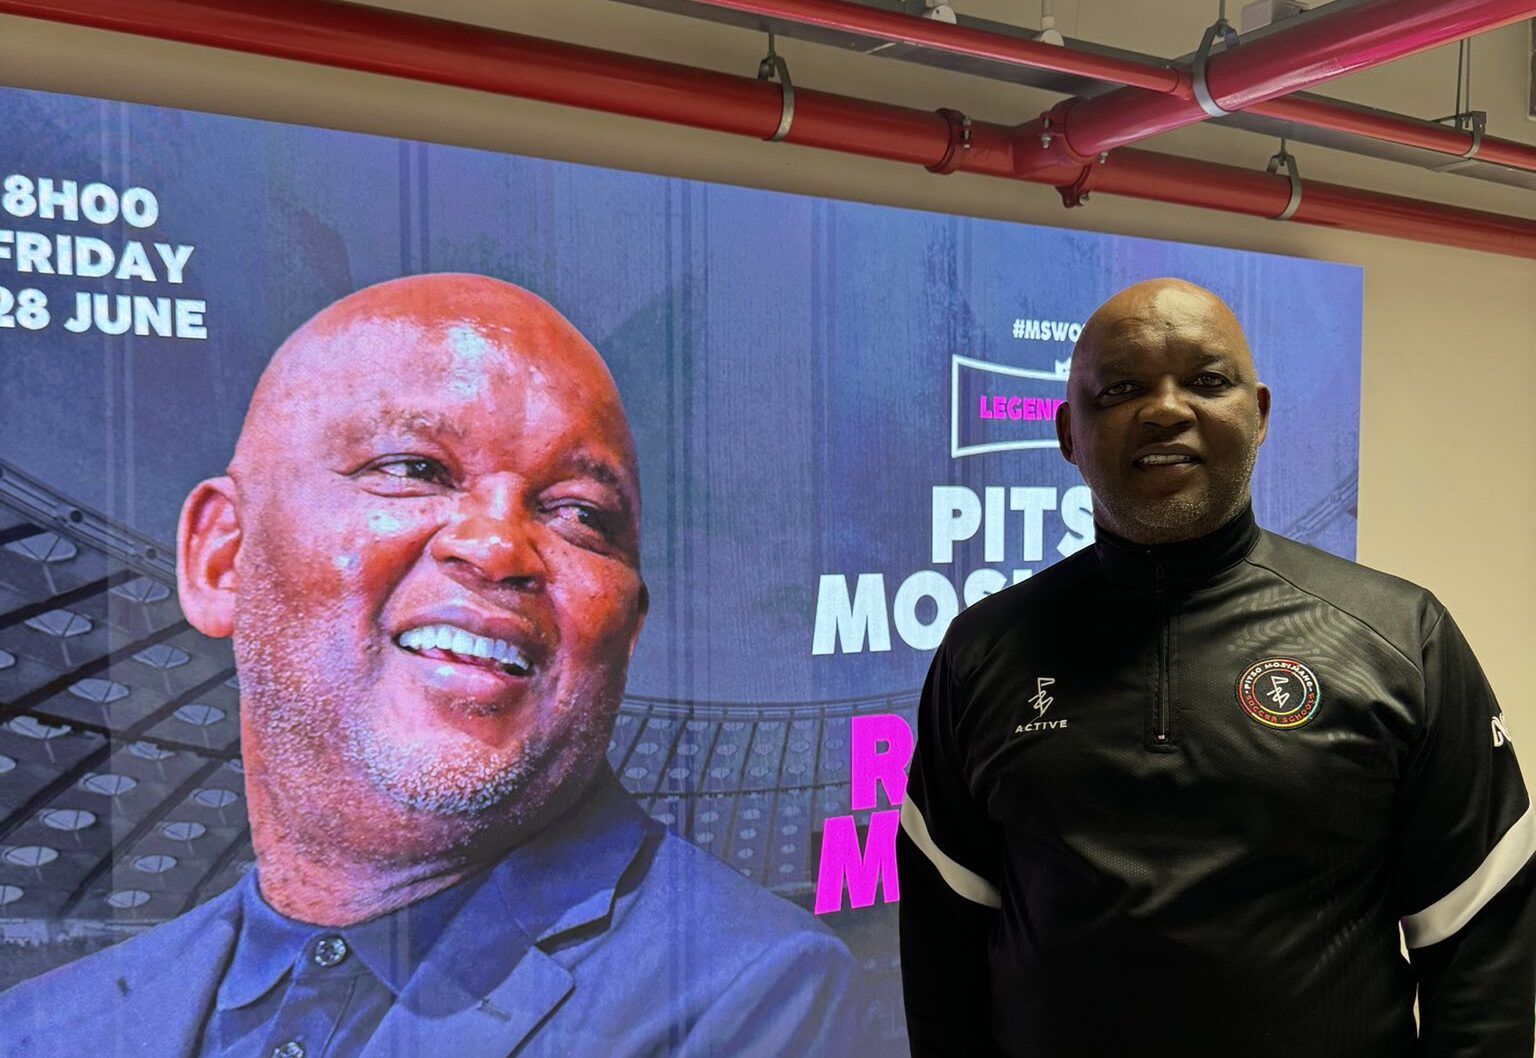 Pitso Mosimane Highlights Zimbabwe's Talent in Building His Coaching Legacy